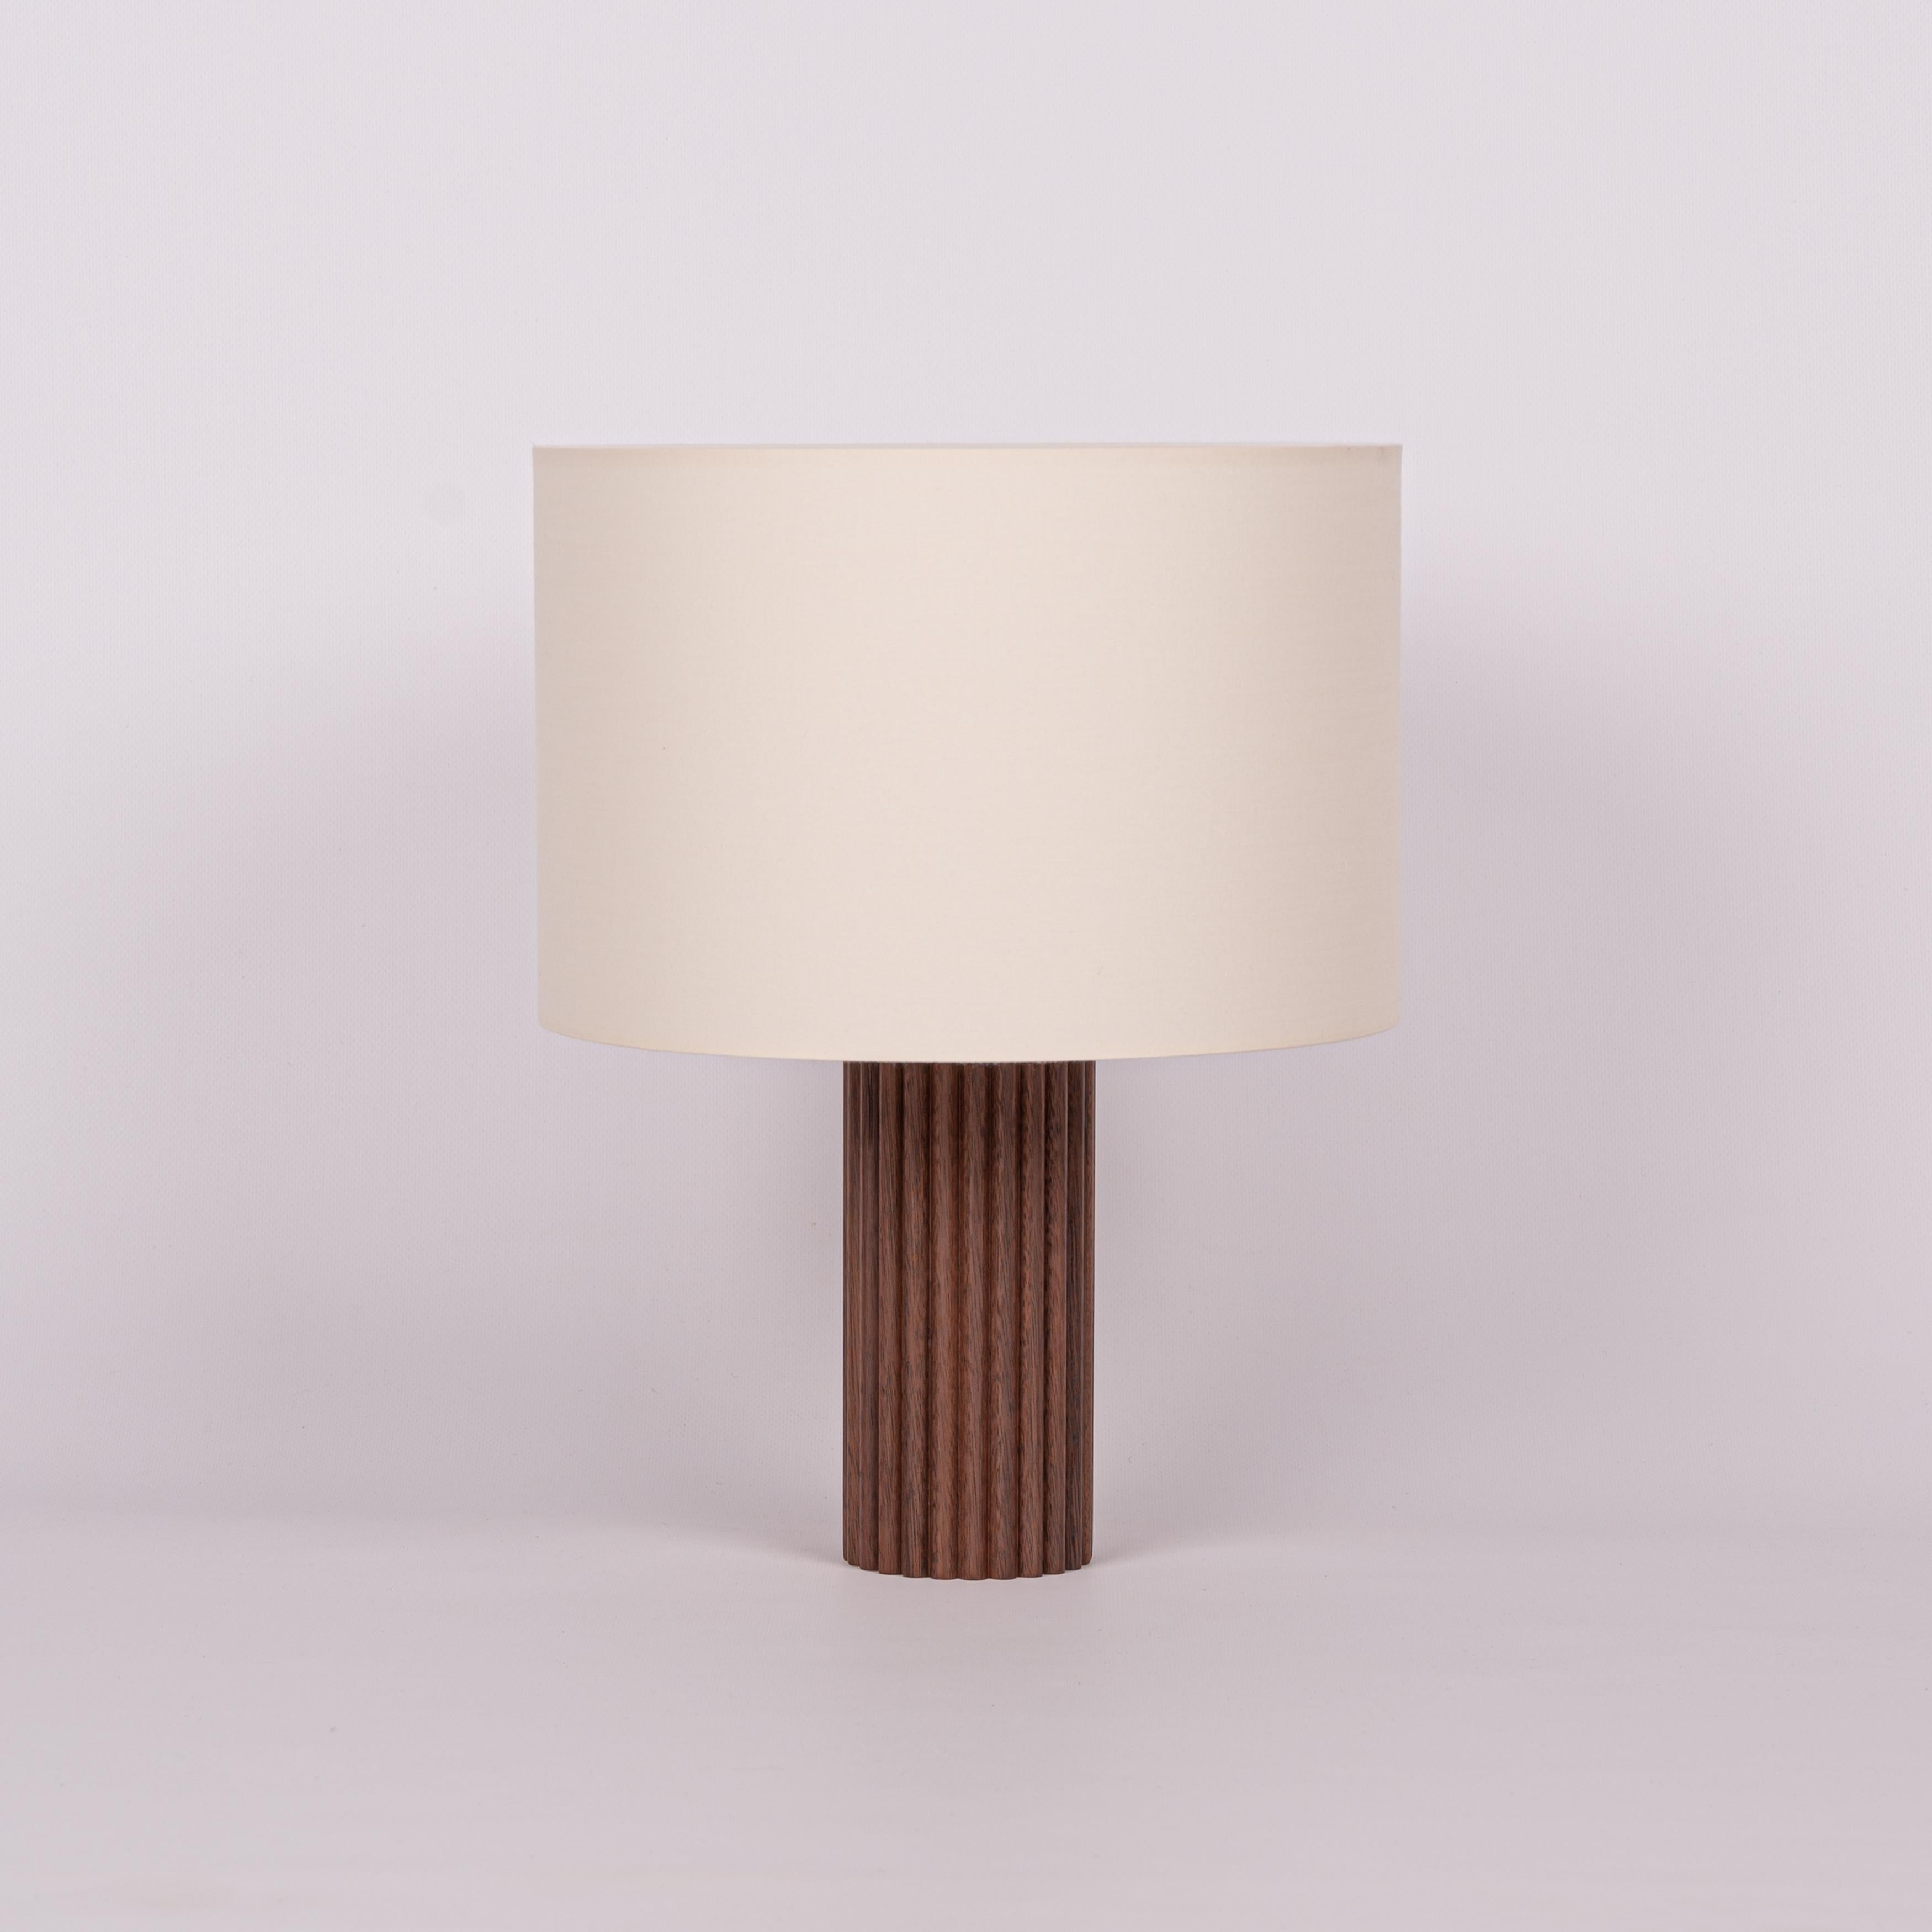 Walnut Flutita Table Lamp by Simone & Marcel
Dimensions: Ø 30 x H 40 cm.
Materials: Cotton and walnut.

Also available in different marble and wood options and finishes. Custom options available on request. Please contact us. 

All our lamps can be